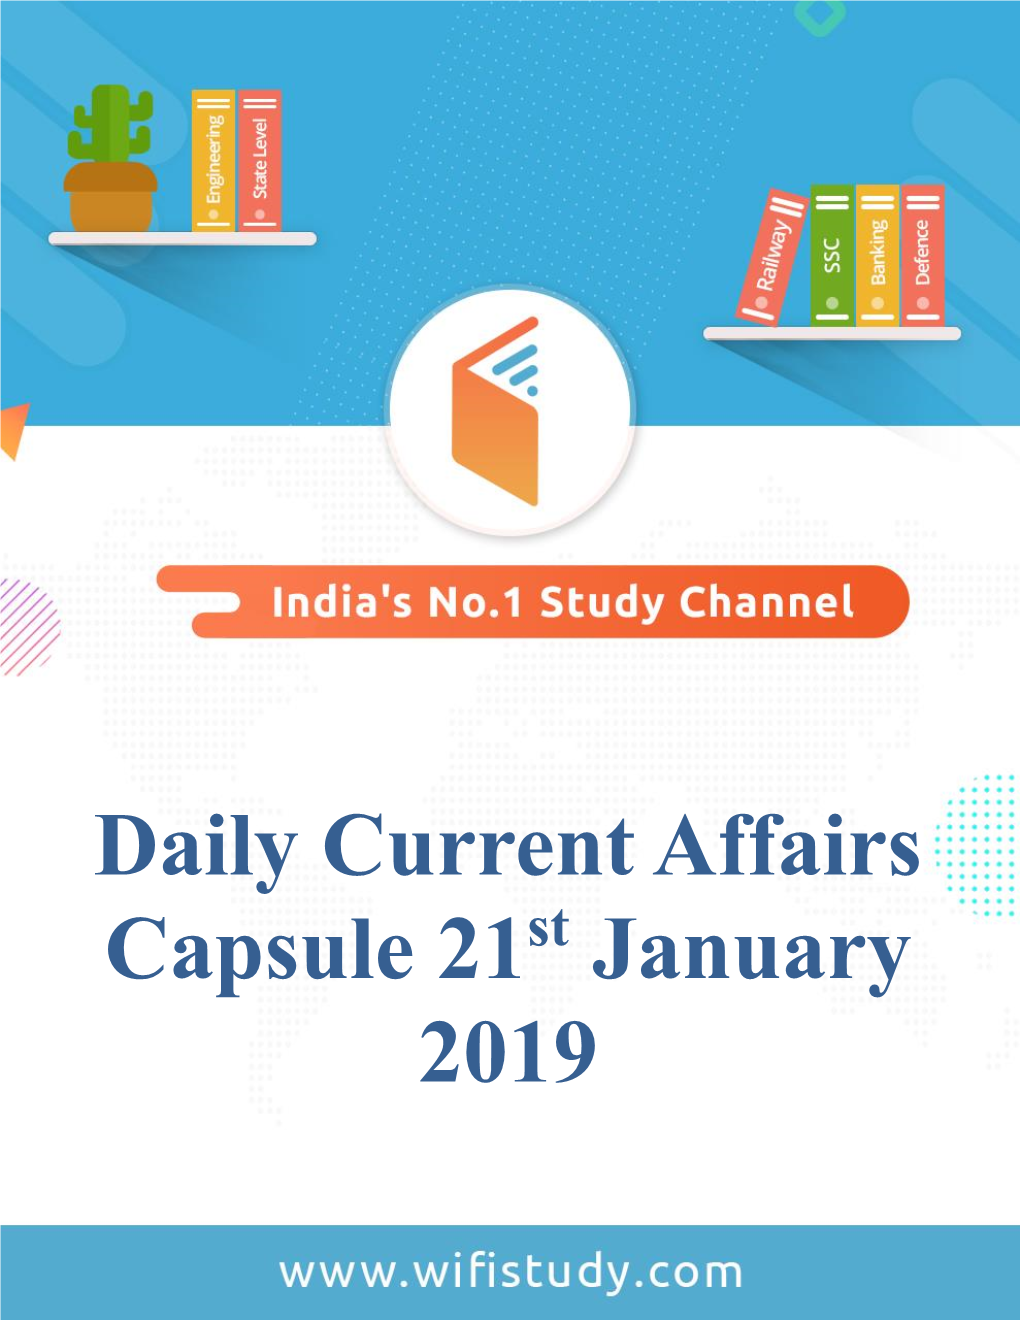 Daily Current Affairs Capsule 21 January 2019